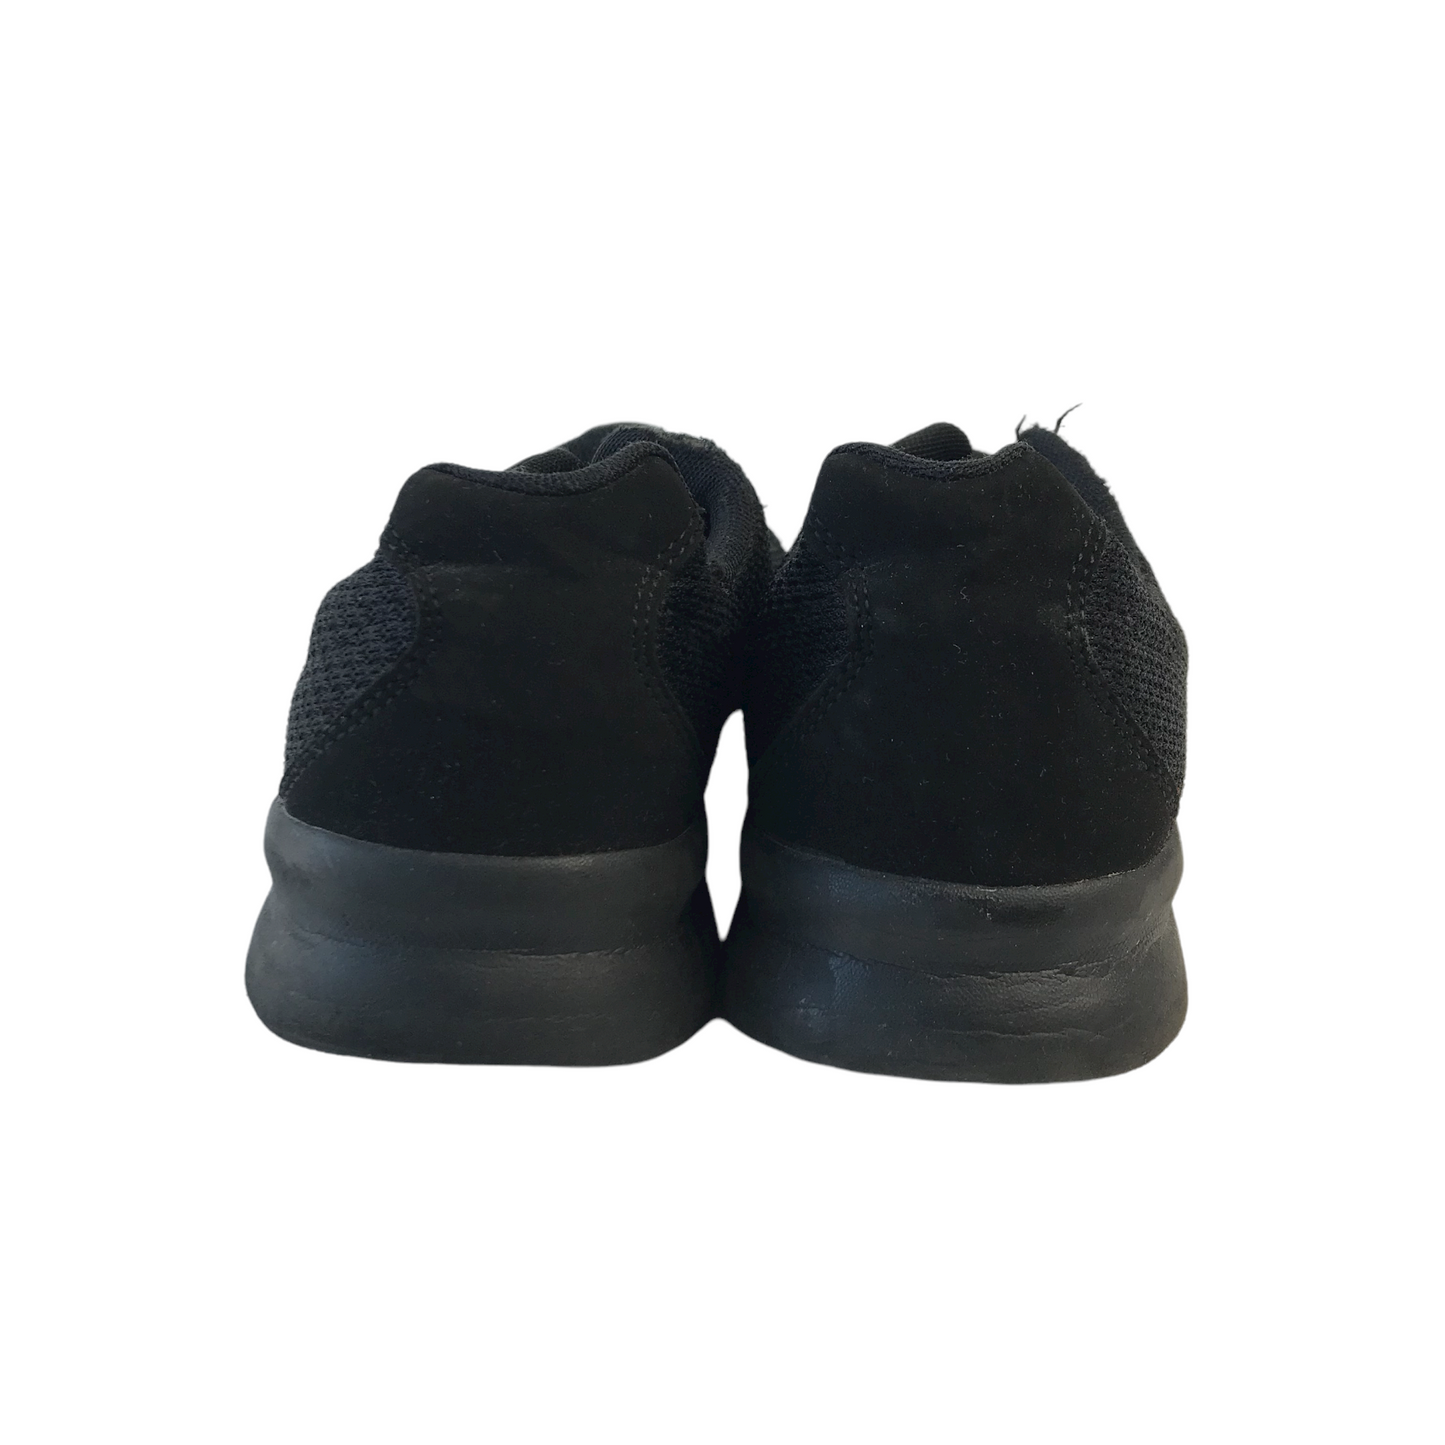 Vty Black Trainers Shoe Size 7